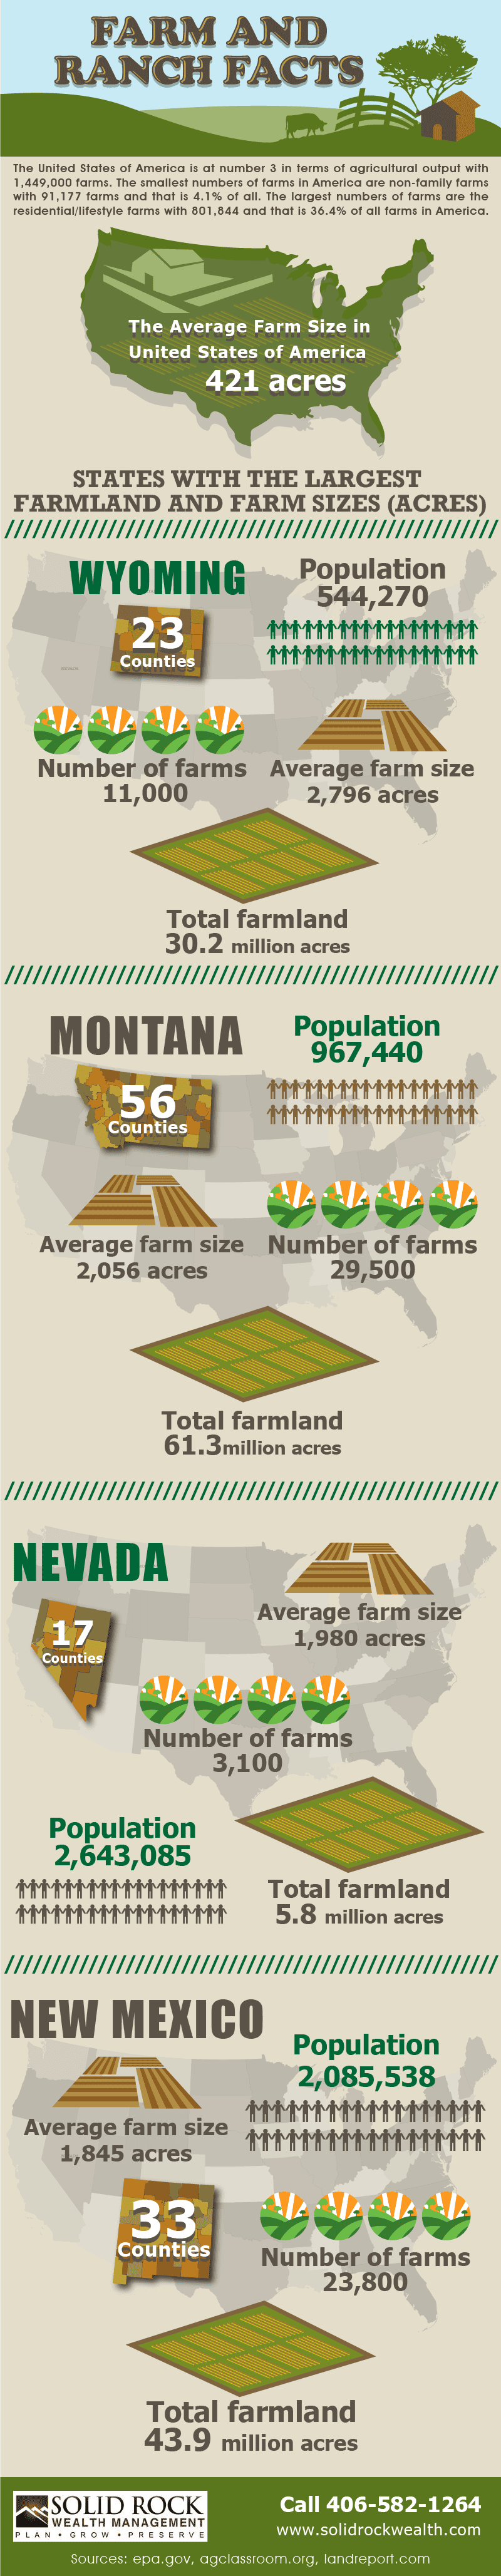 Farm and ranch facts infographic